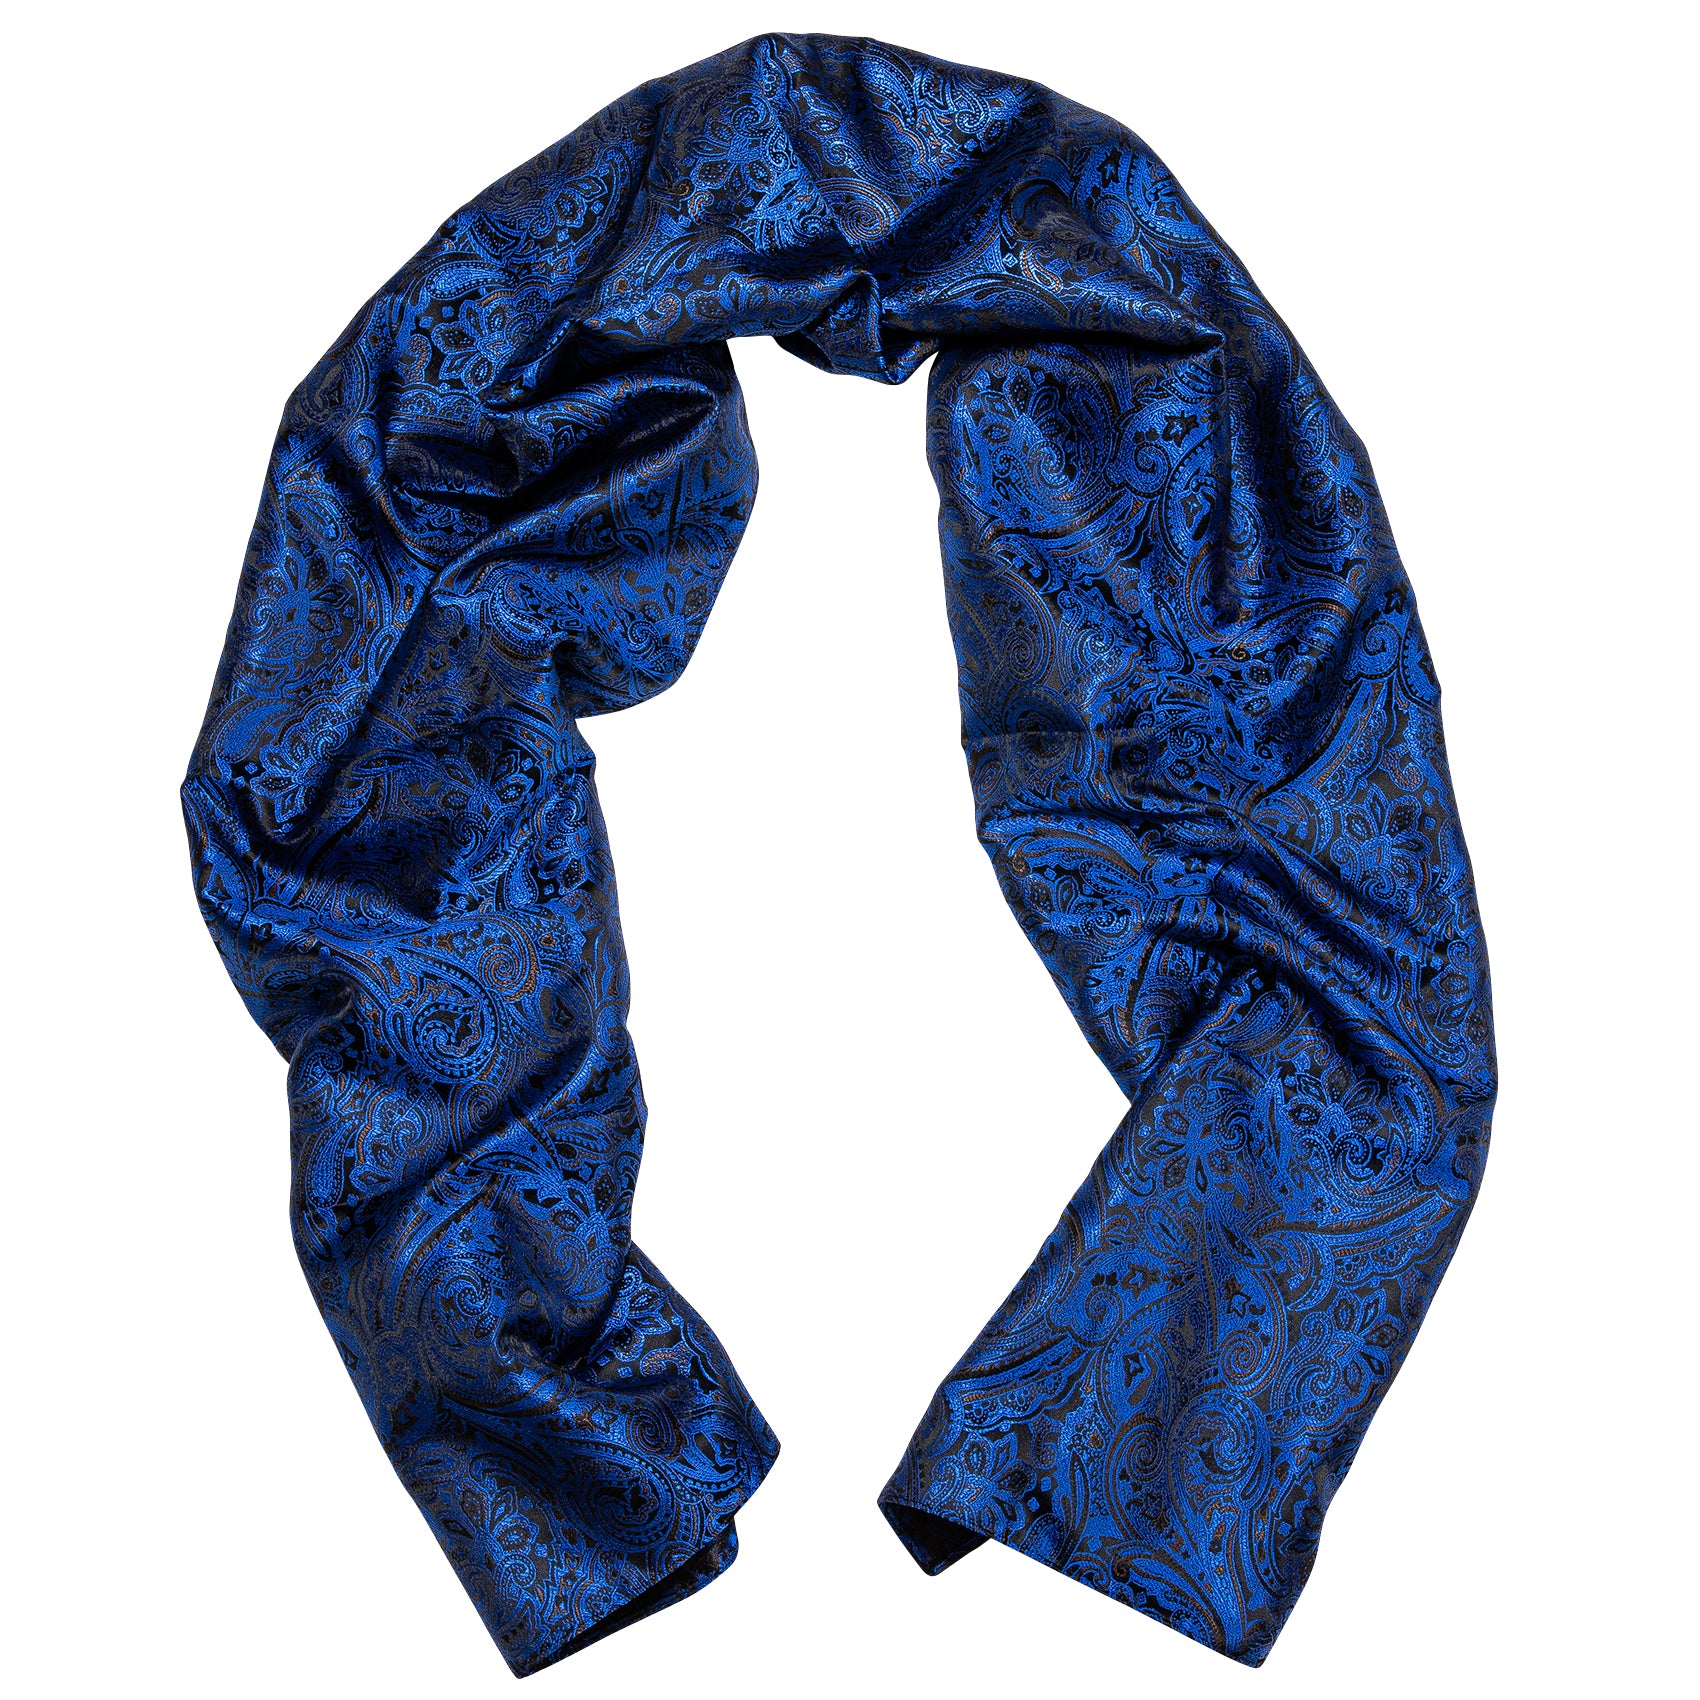 Barry.wang Men's Scarf Luxury Blue Black Floral Scarf